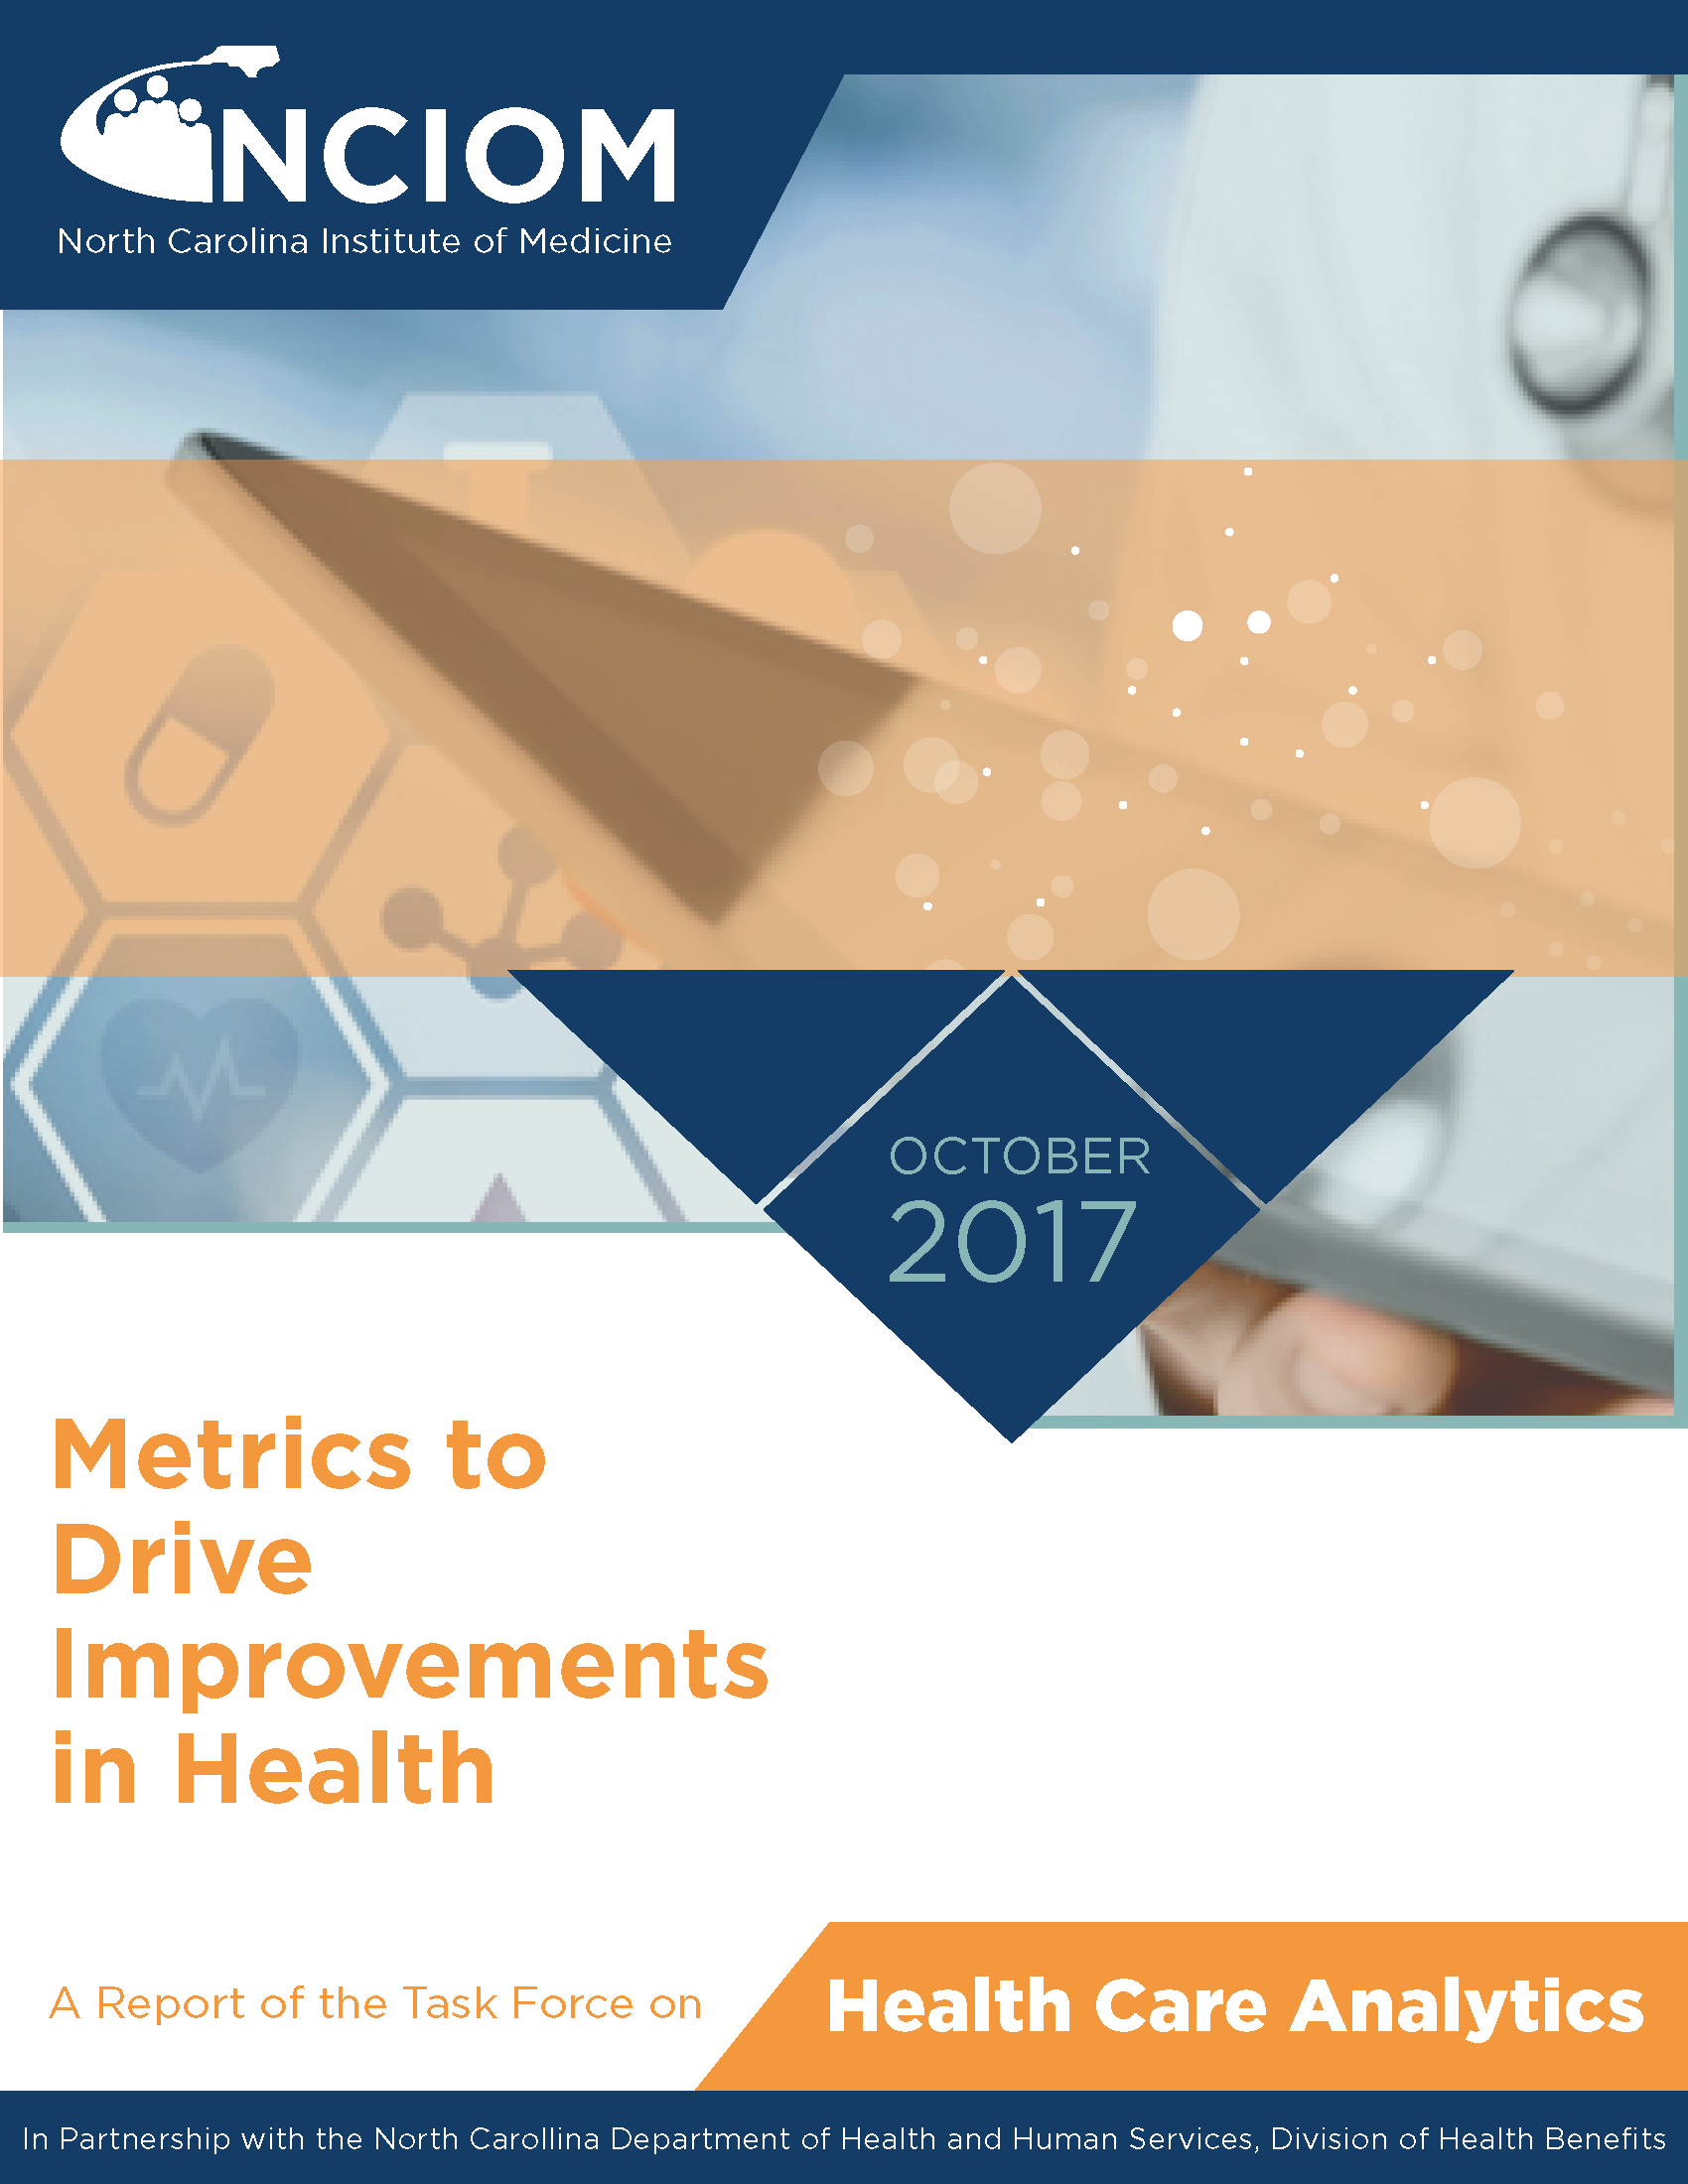 CCNC experts contribute to NCIOM publication on the task force in health care analytics